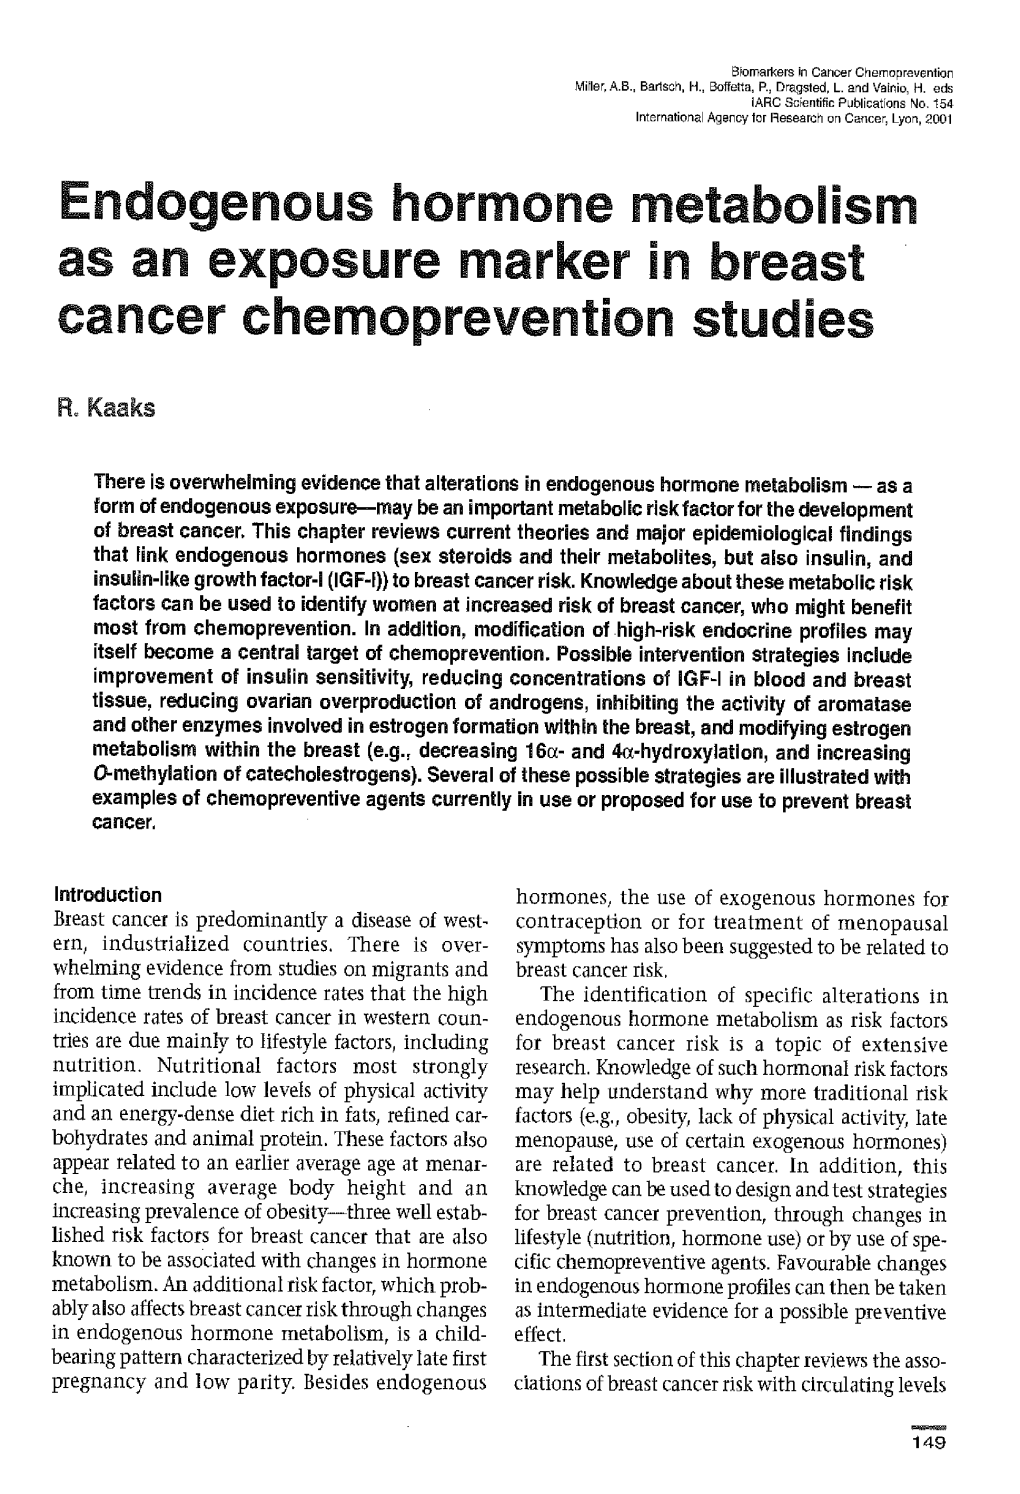 Breast Cancer Is Predominantly a Disease of West- Contraception Or for Treatment of Menopausal Ern, Industrialized Countries